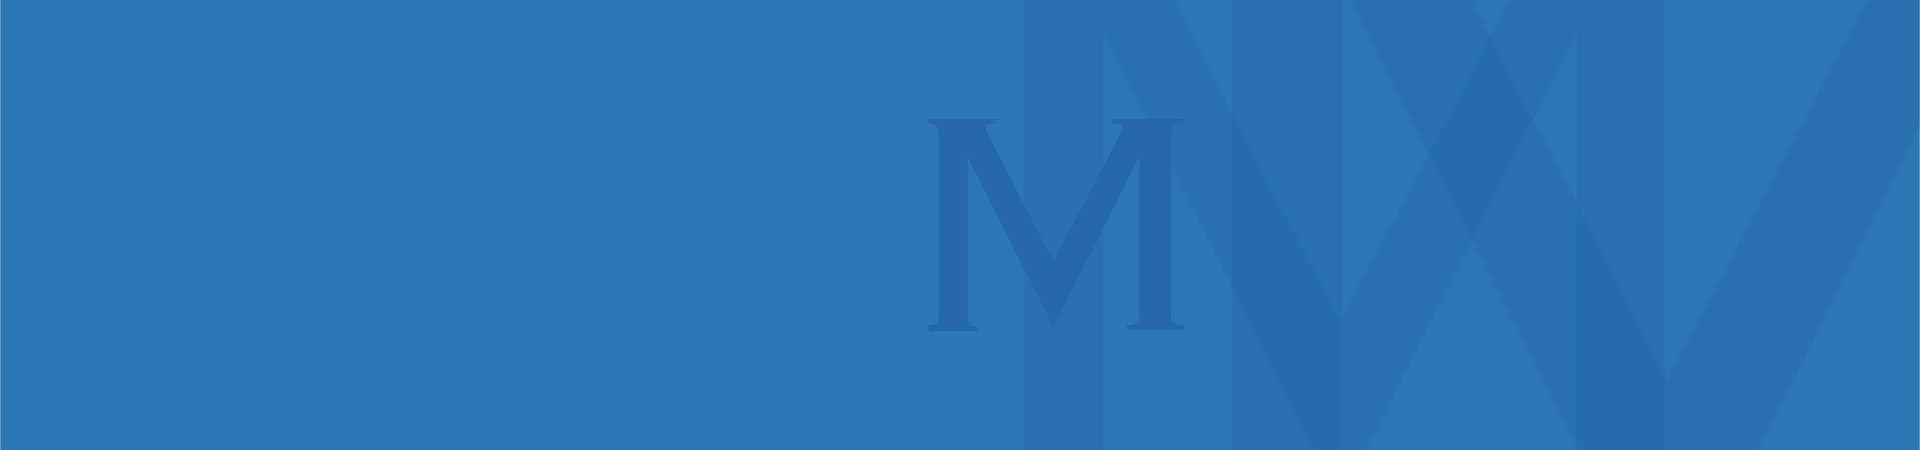 Blue background with letter M from McKellar McGowan logo